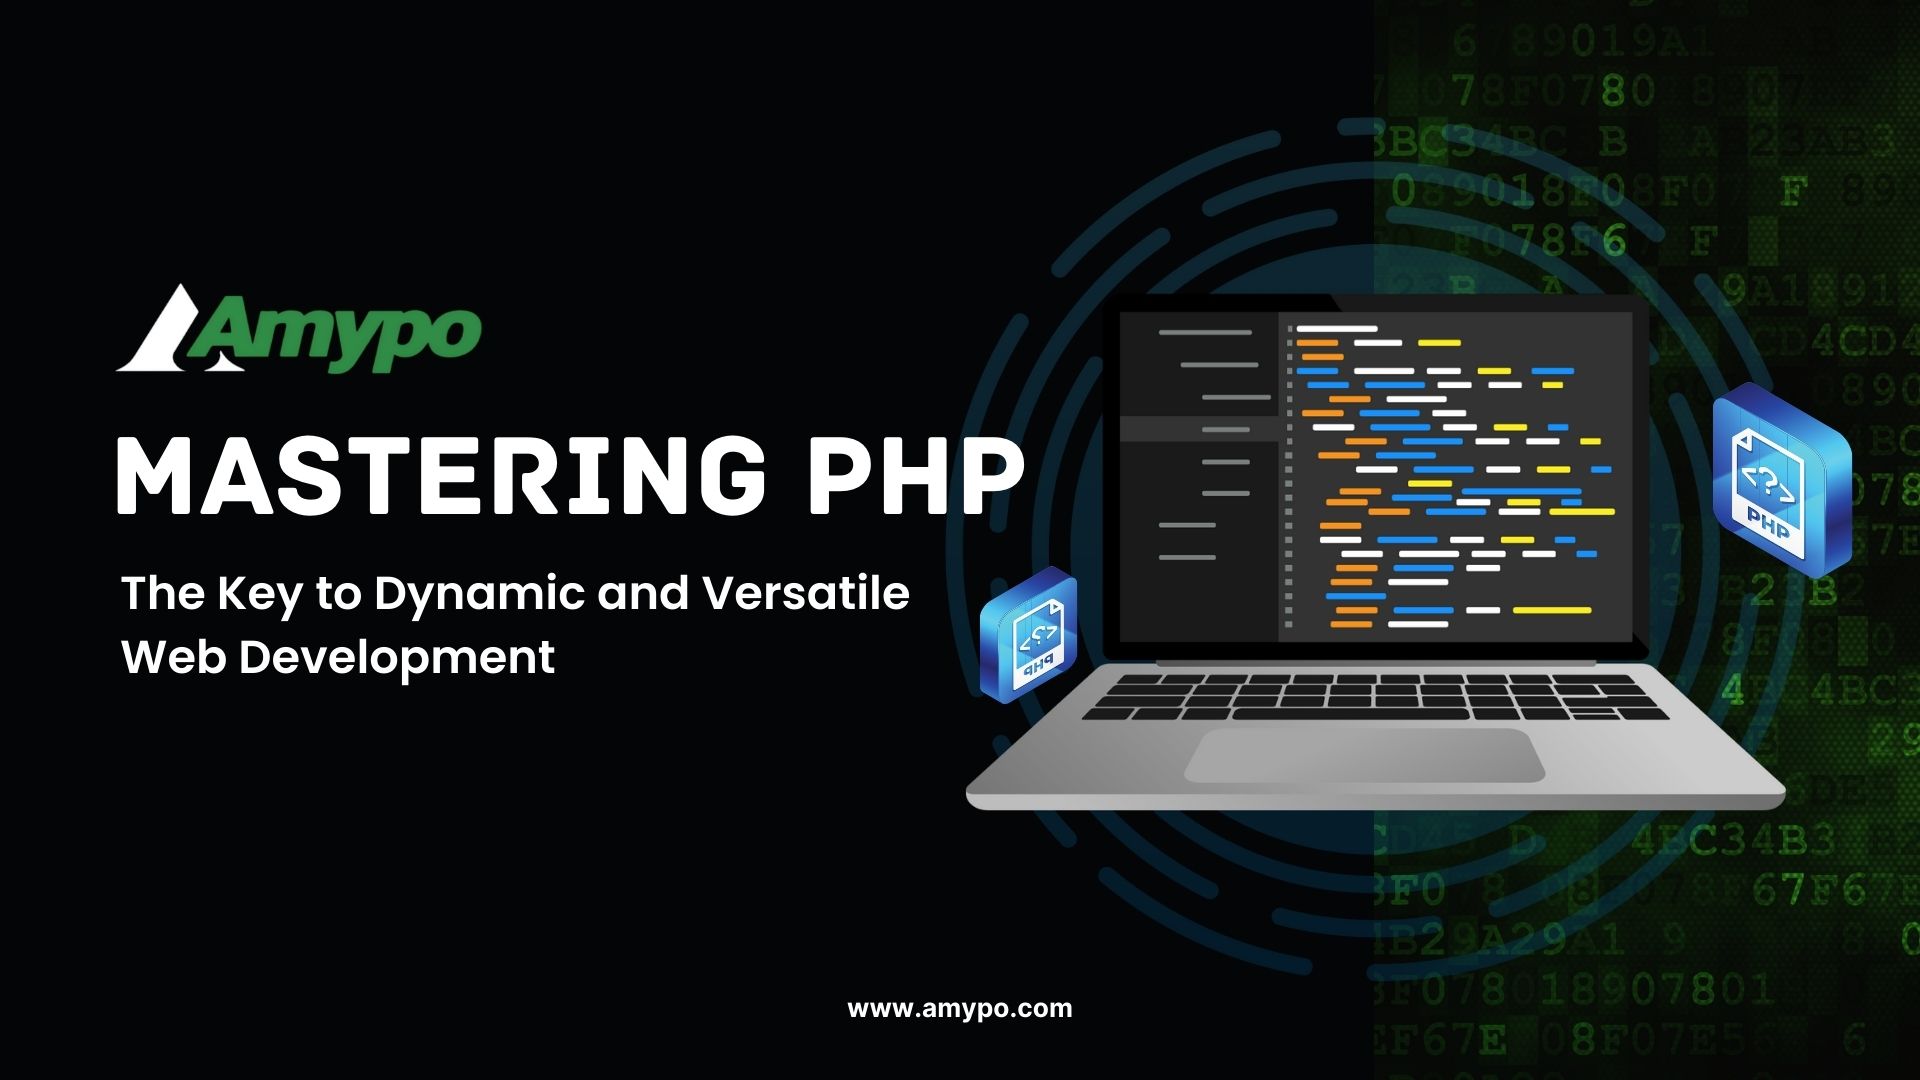 "Mastering PHP: The Key to Dynamic and Versatile Web Development"